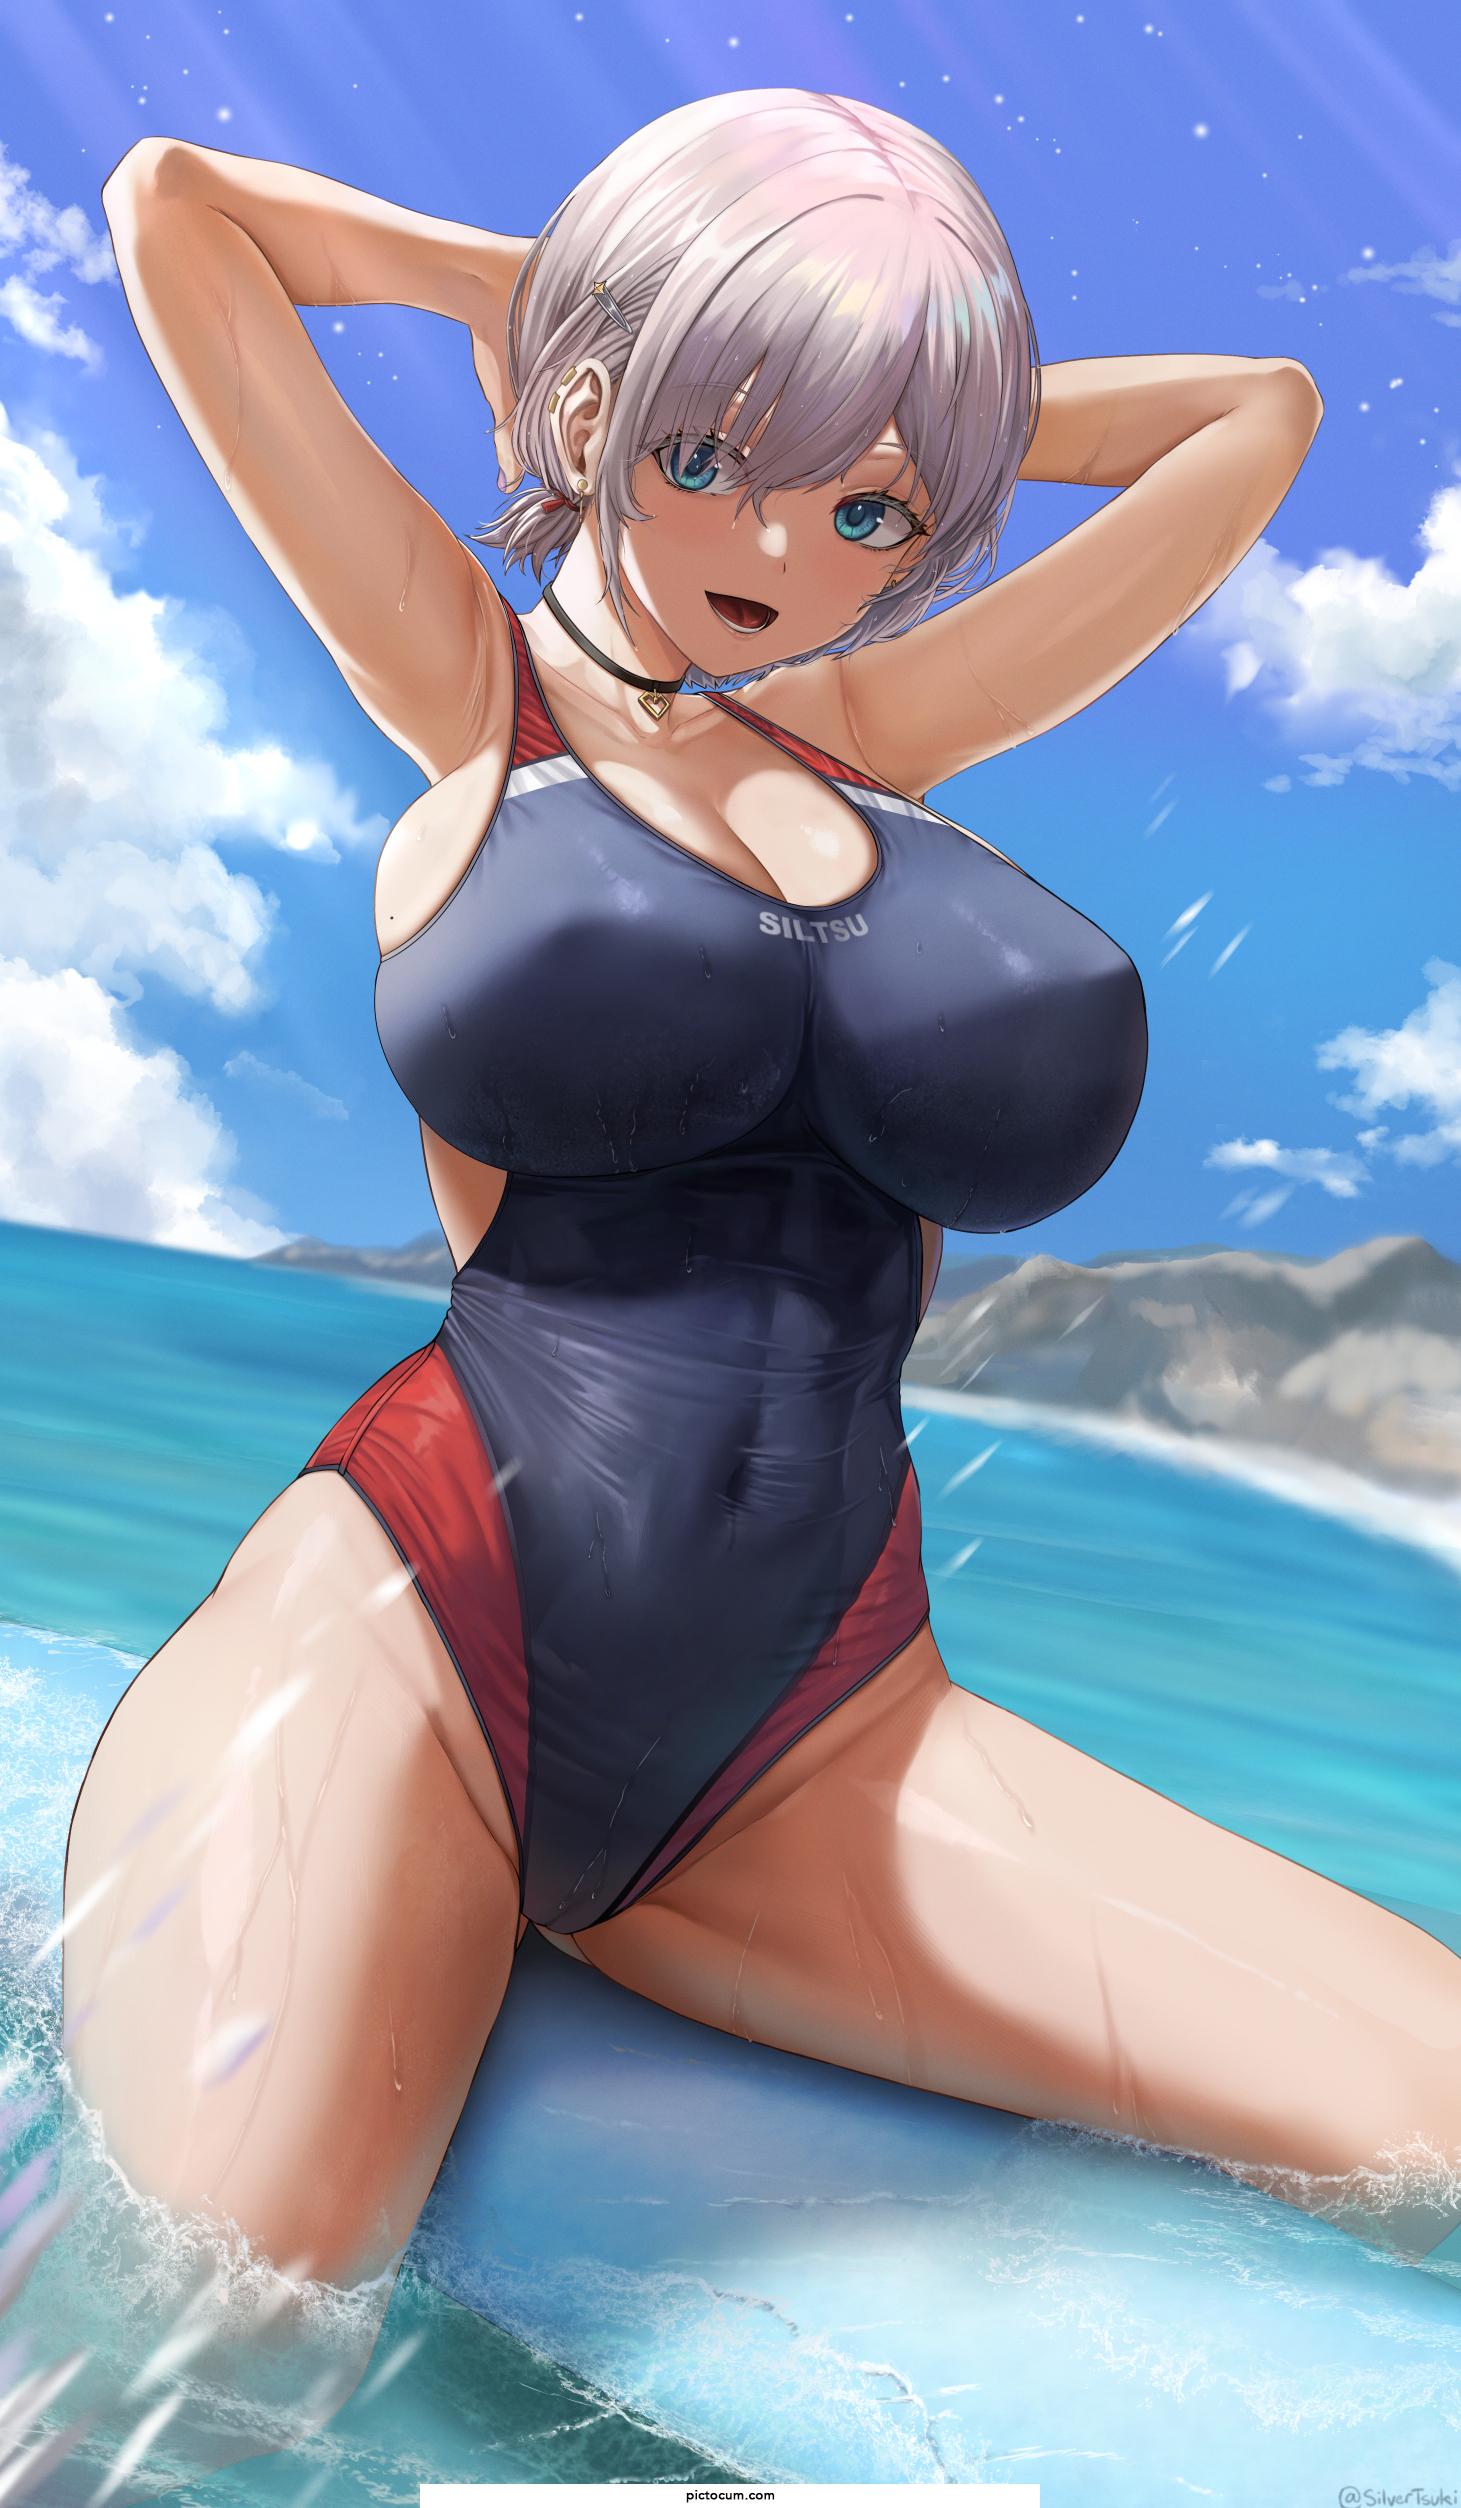 Swimsuit thighs